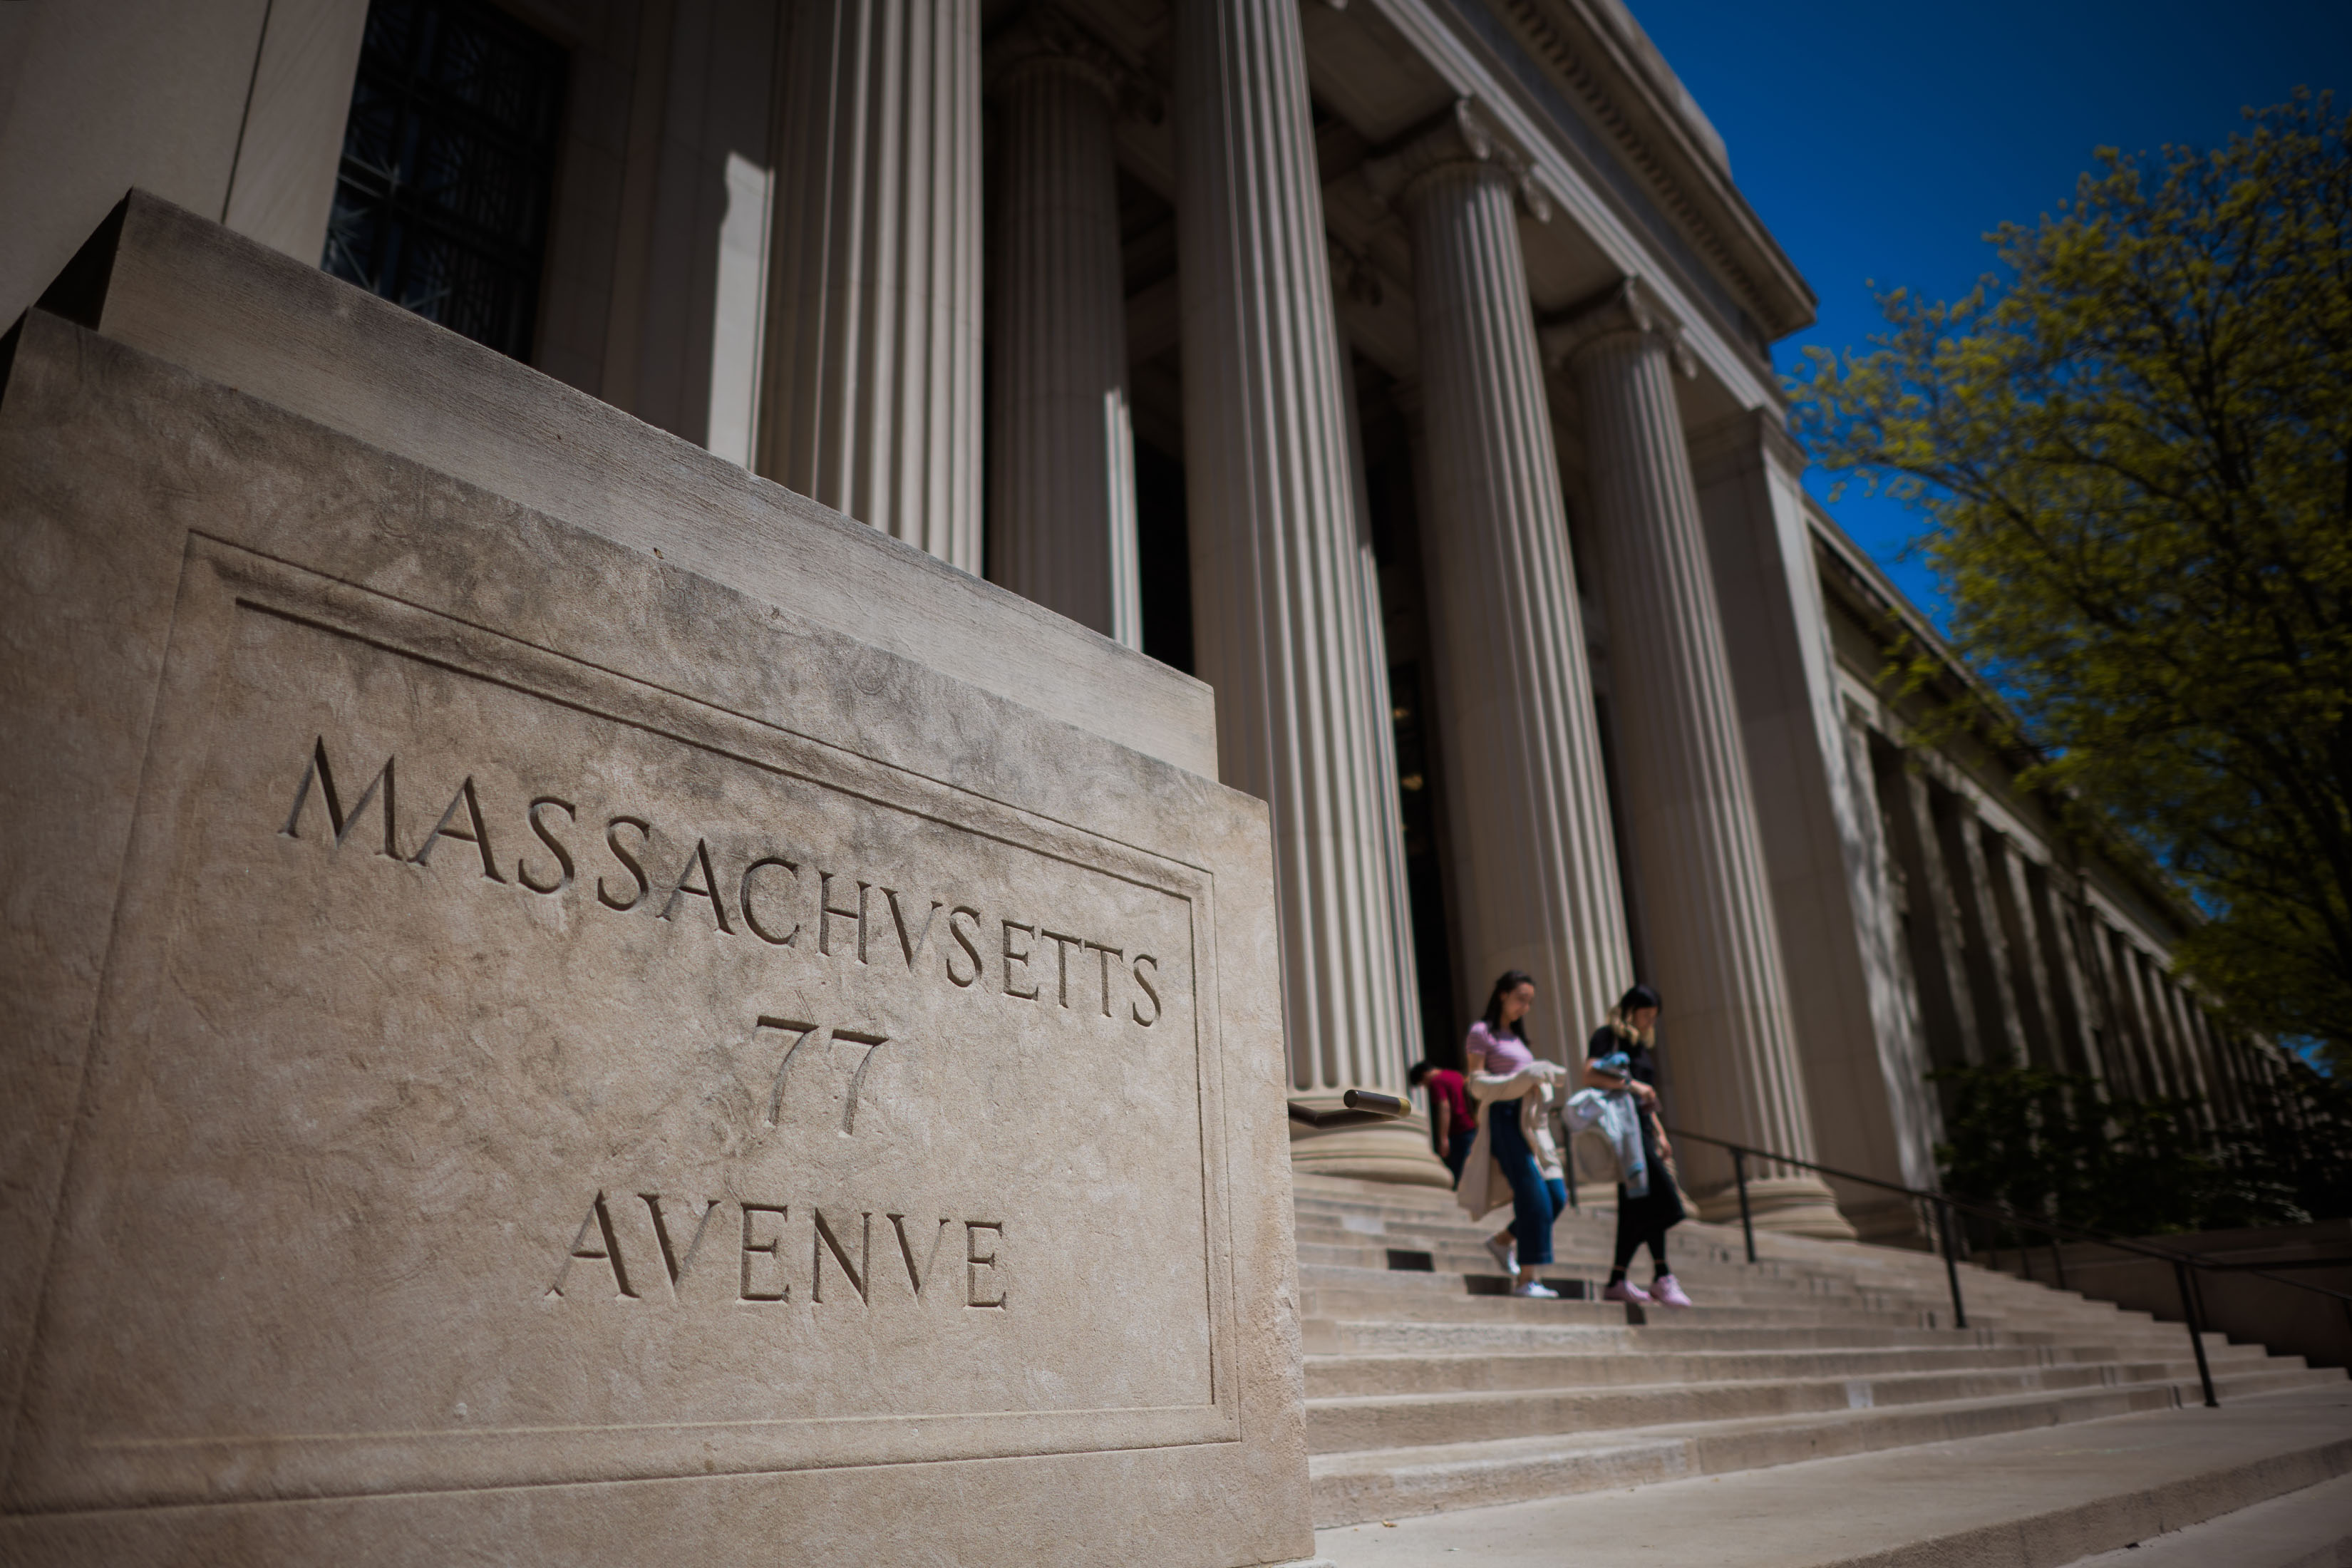 An angled view of MIT's 77 Mass Ave building showing the address carved in stone in foreground and columns in background